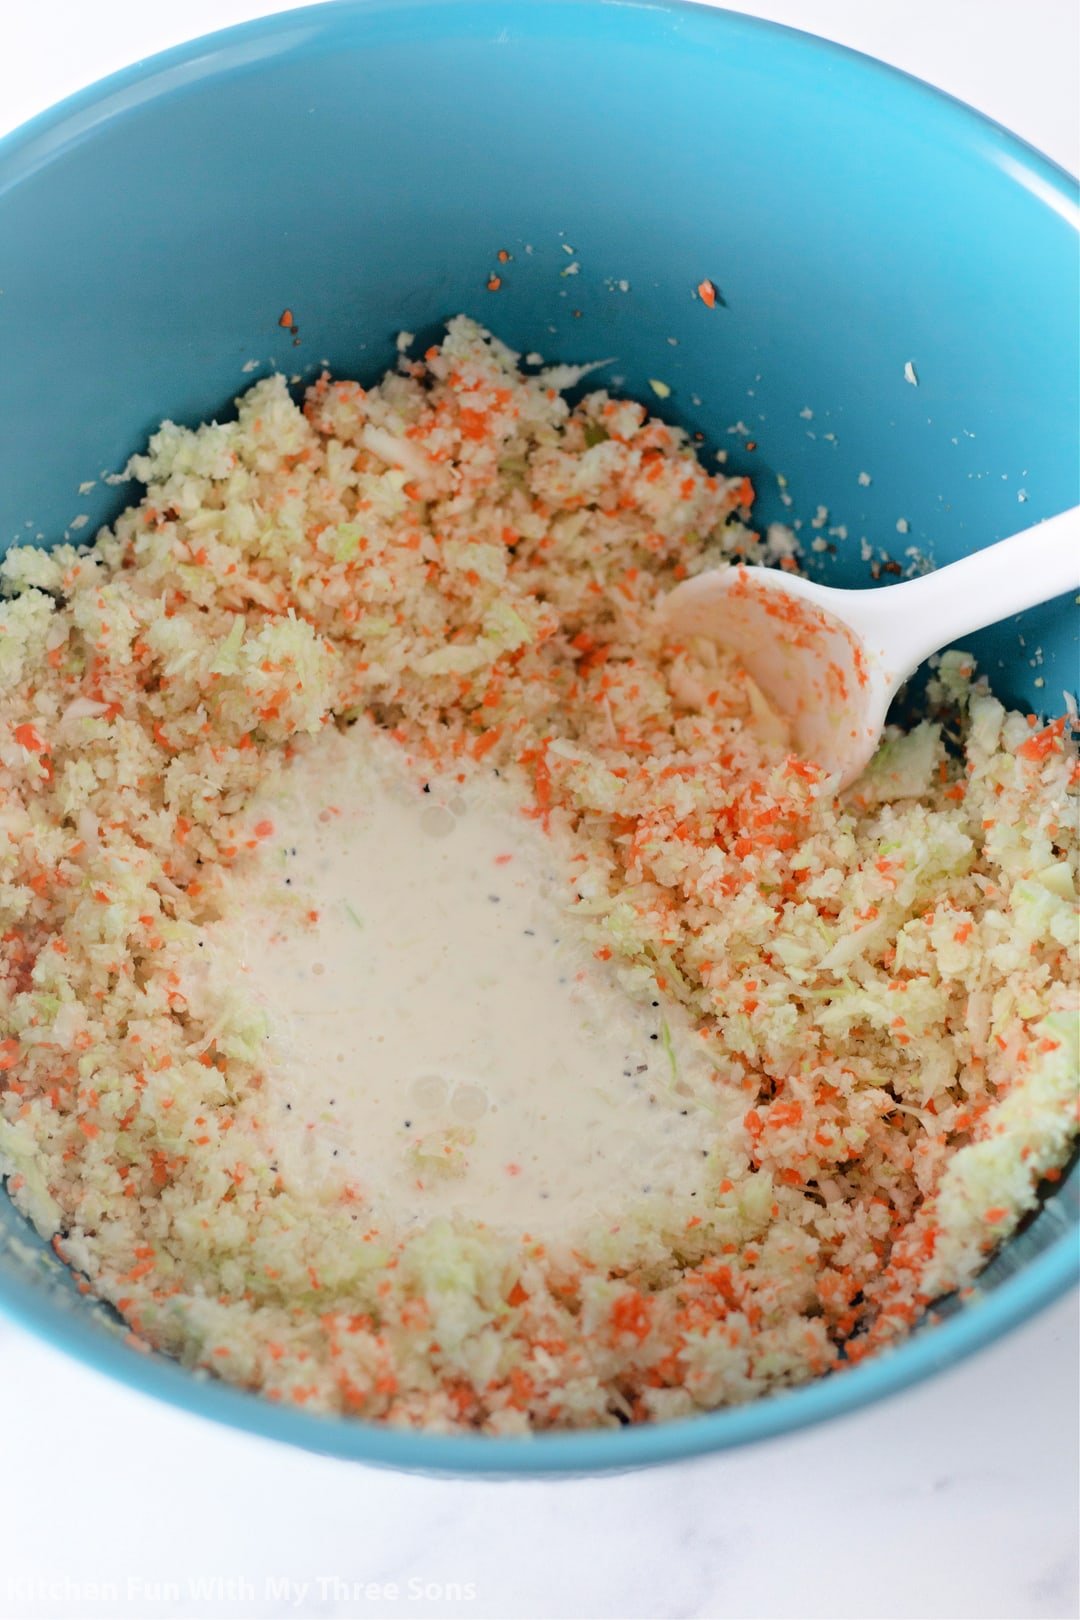 KFC coleslaw ingredients in a blue bowl being mixed